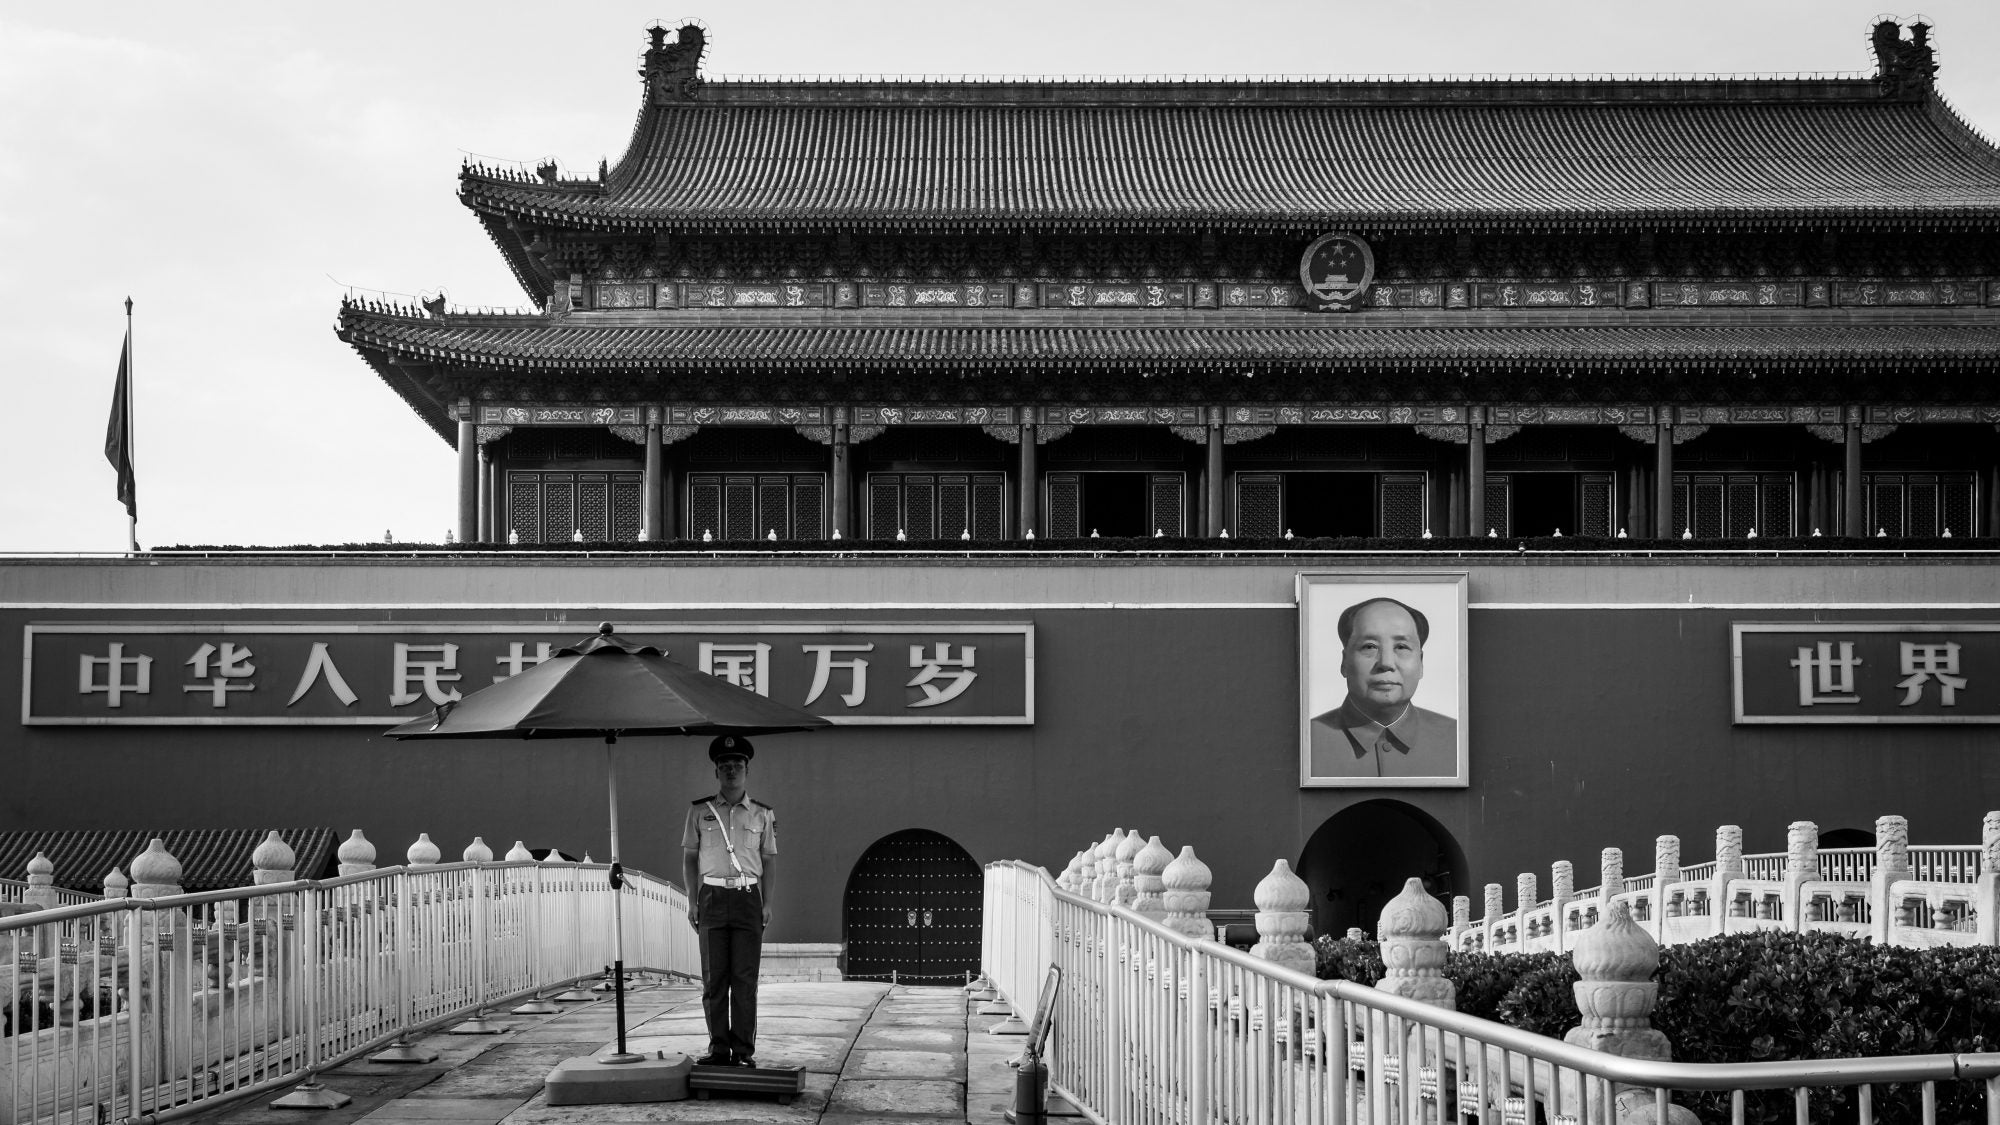 The Tiananmen square and its huge portrait of Chairman Mao